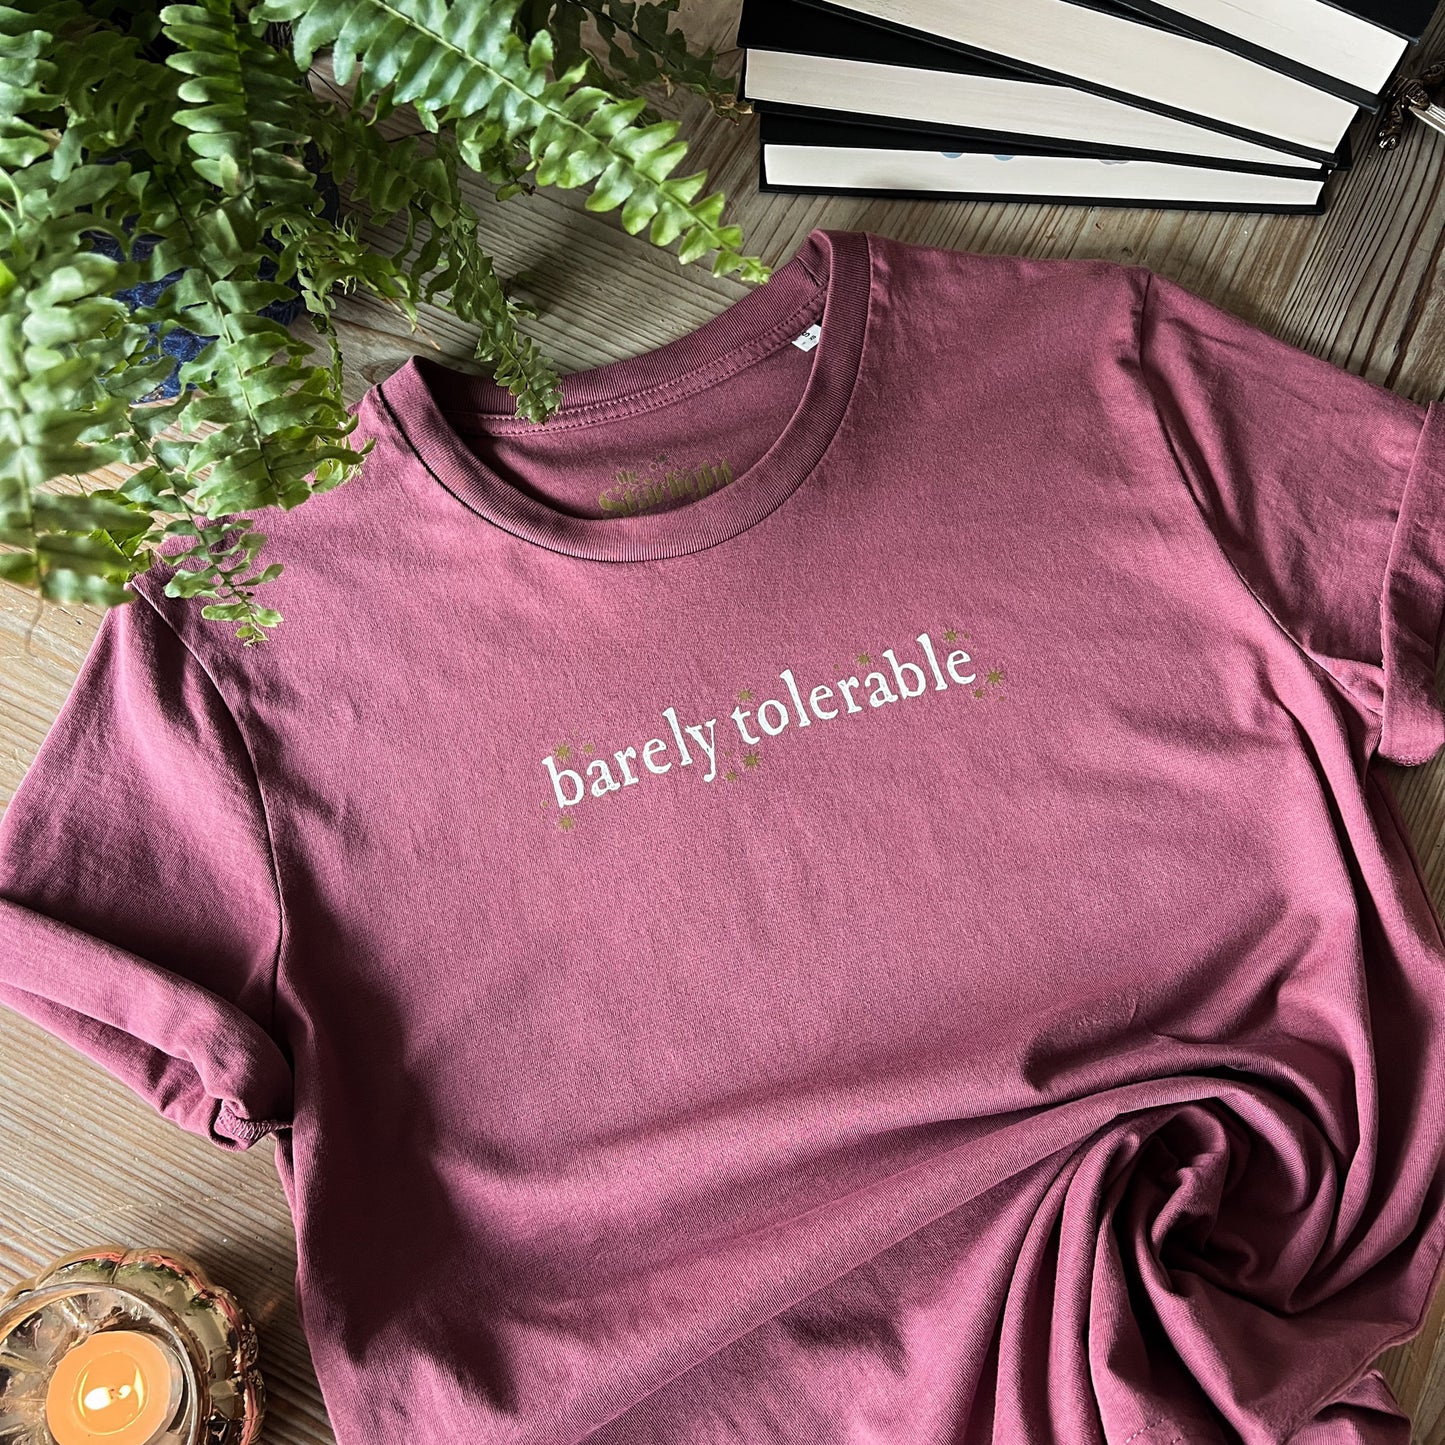 Barely Tolerable Text T-Shirt